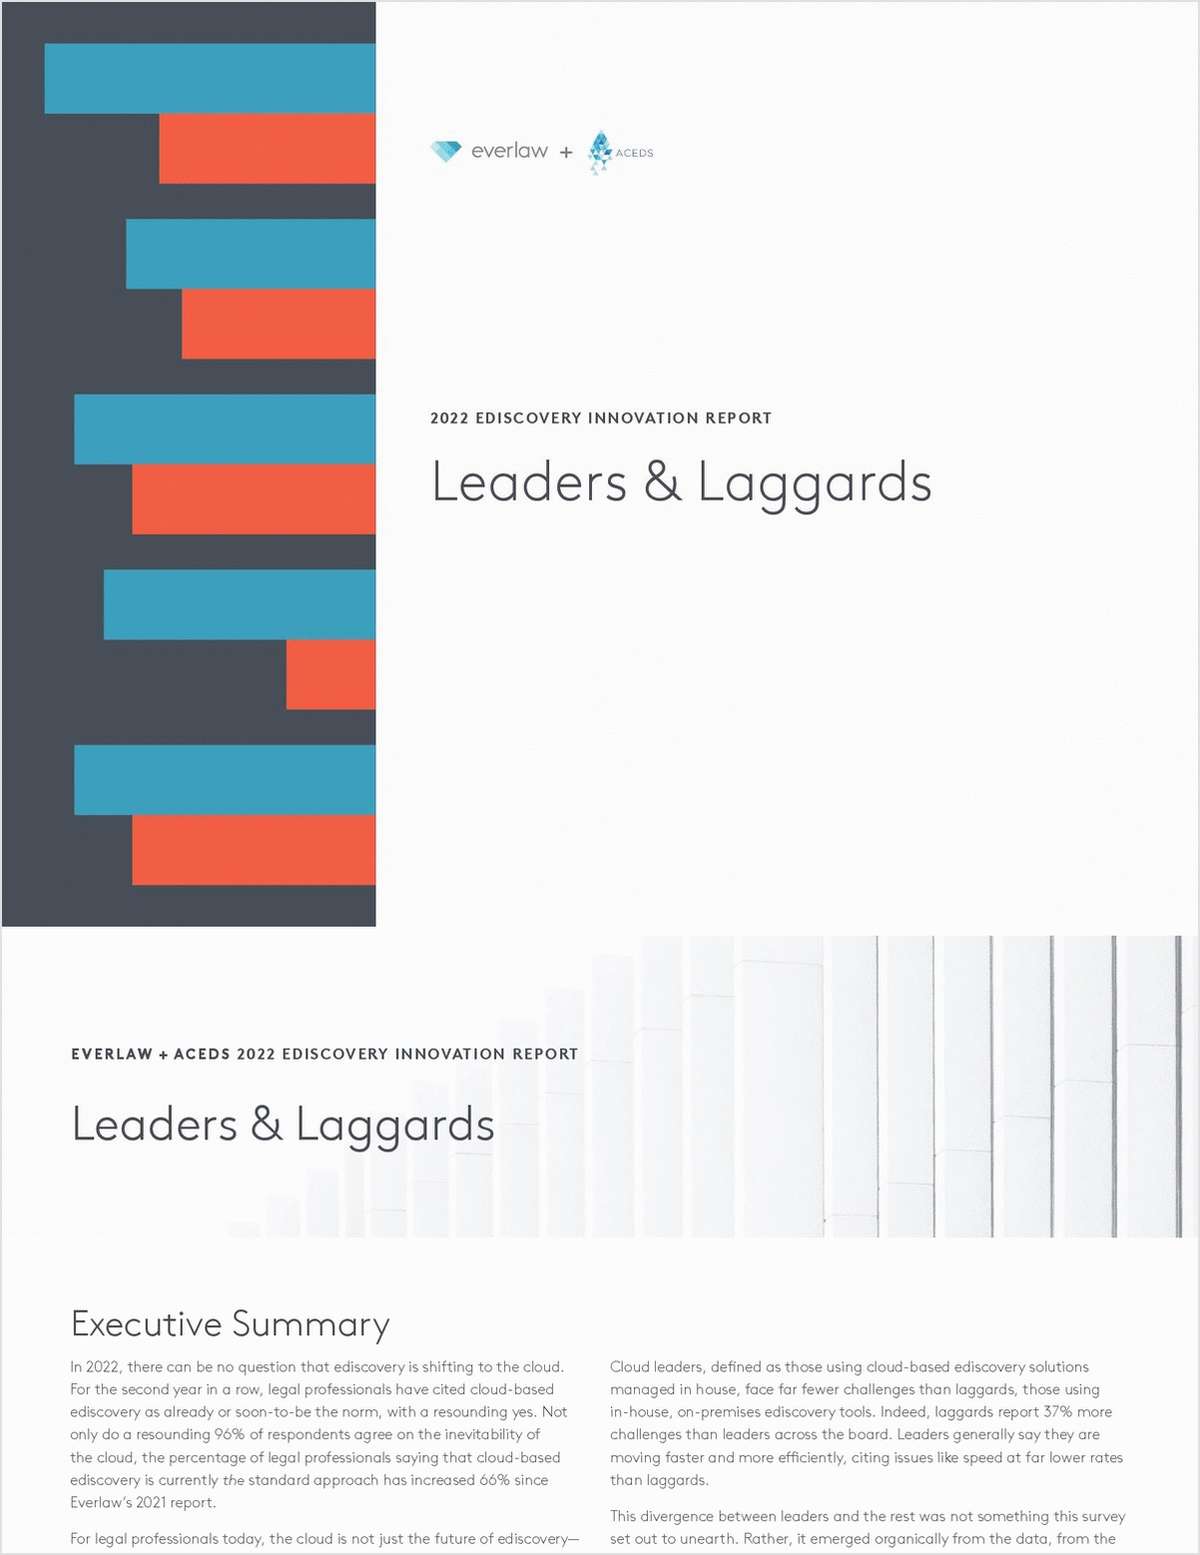 2022 Ediscovery Innovation Report: Leaders & Laggards